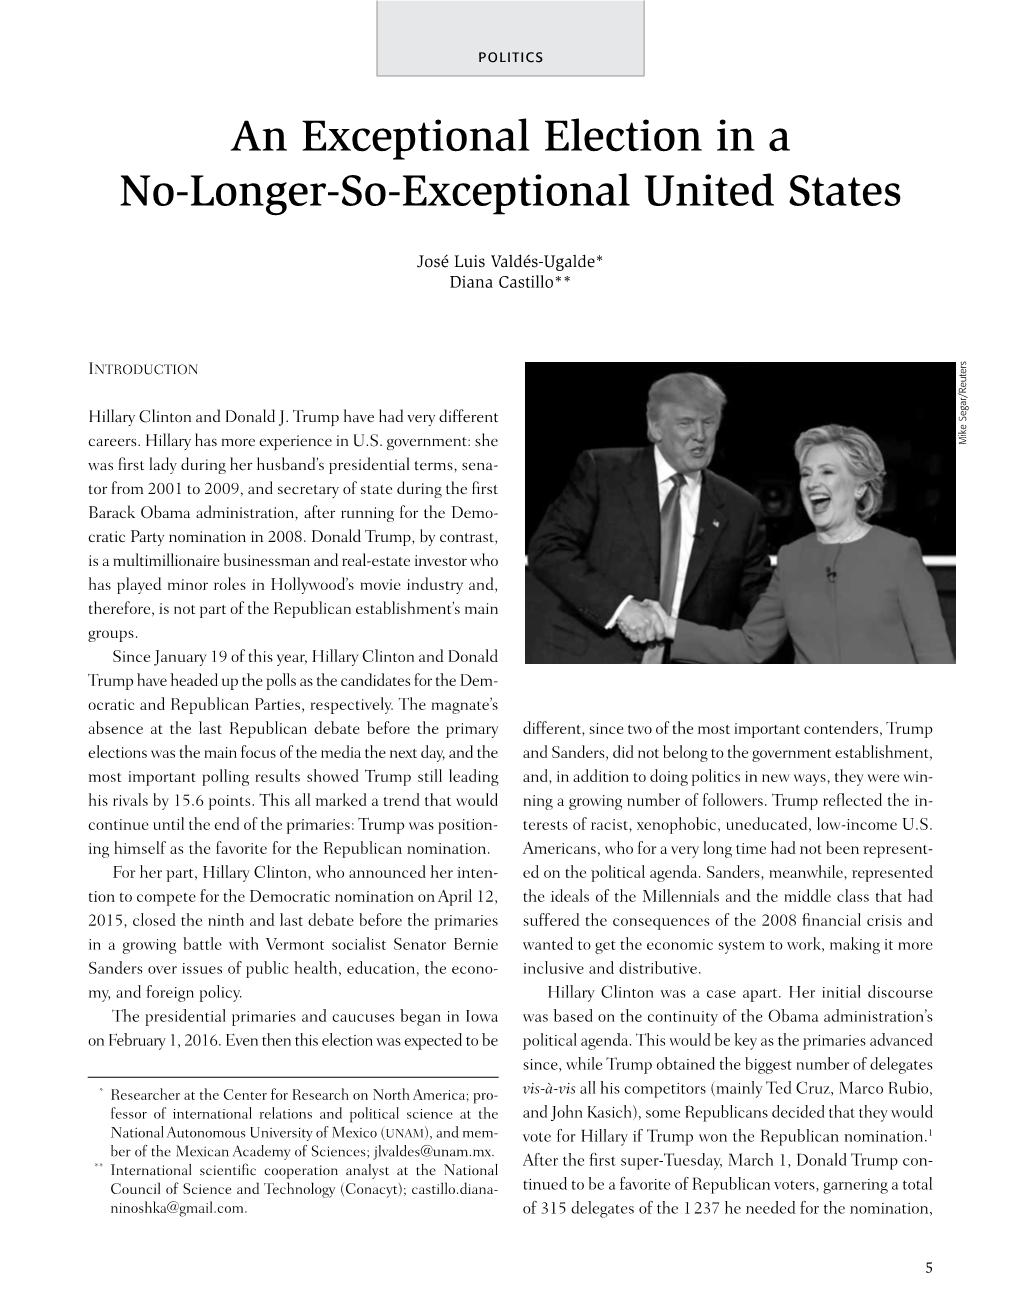 An Exceptional Election in a No-Longer-So-Exceptional United States